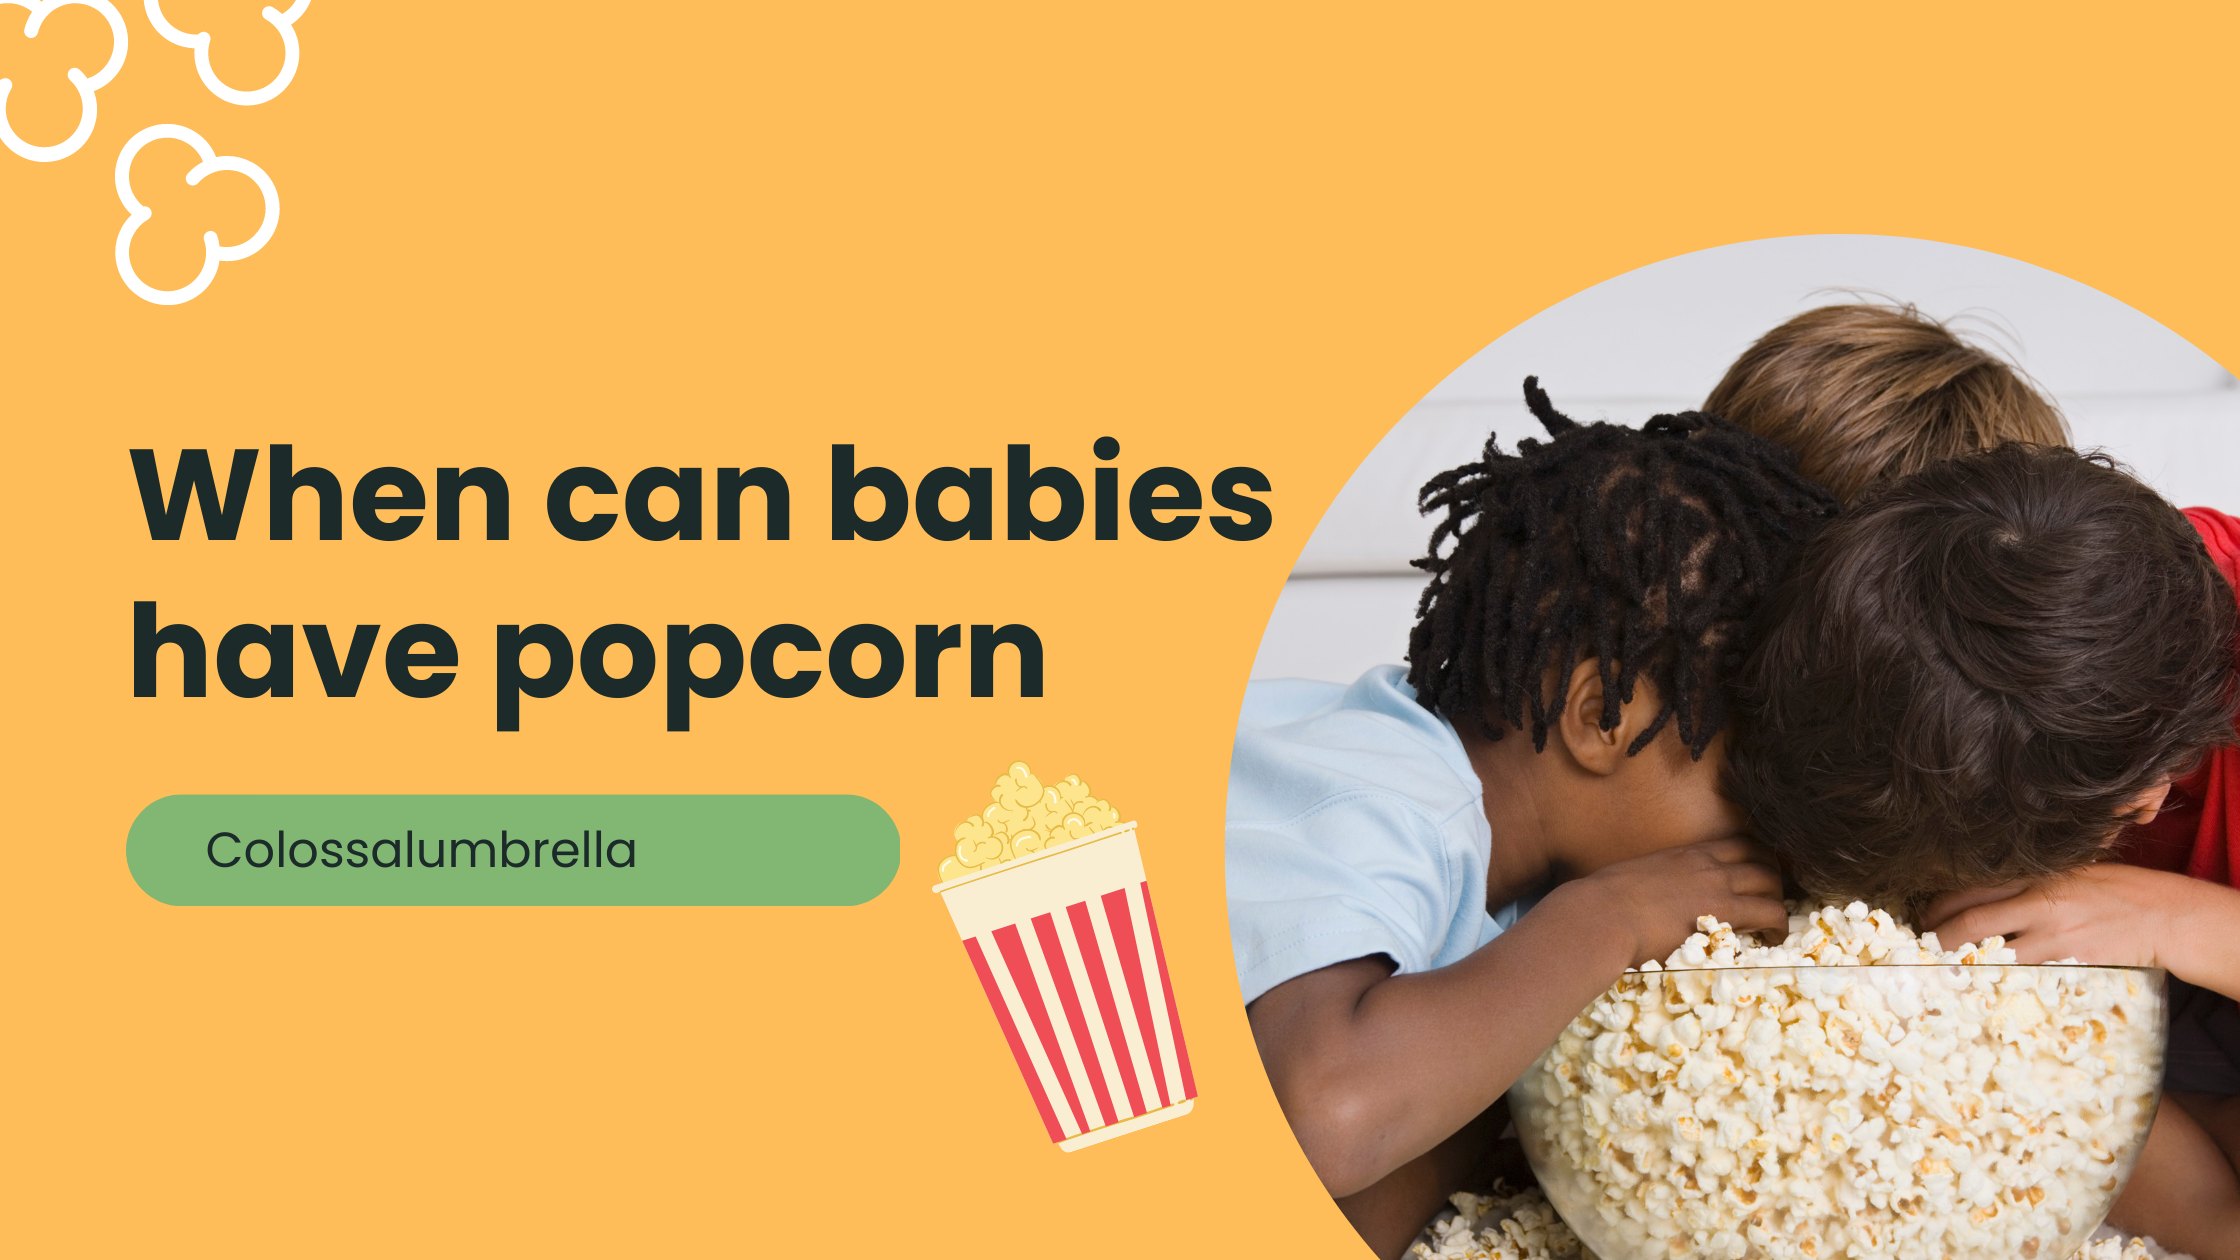 When can babies have popcorn